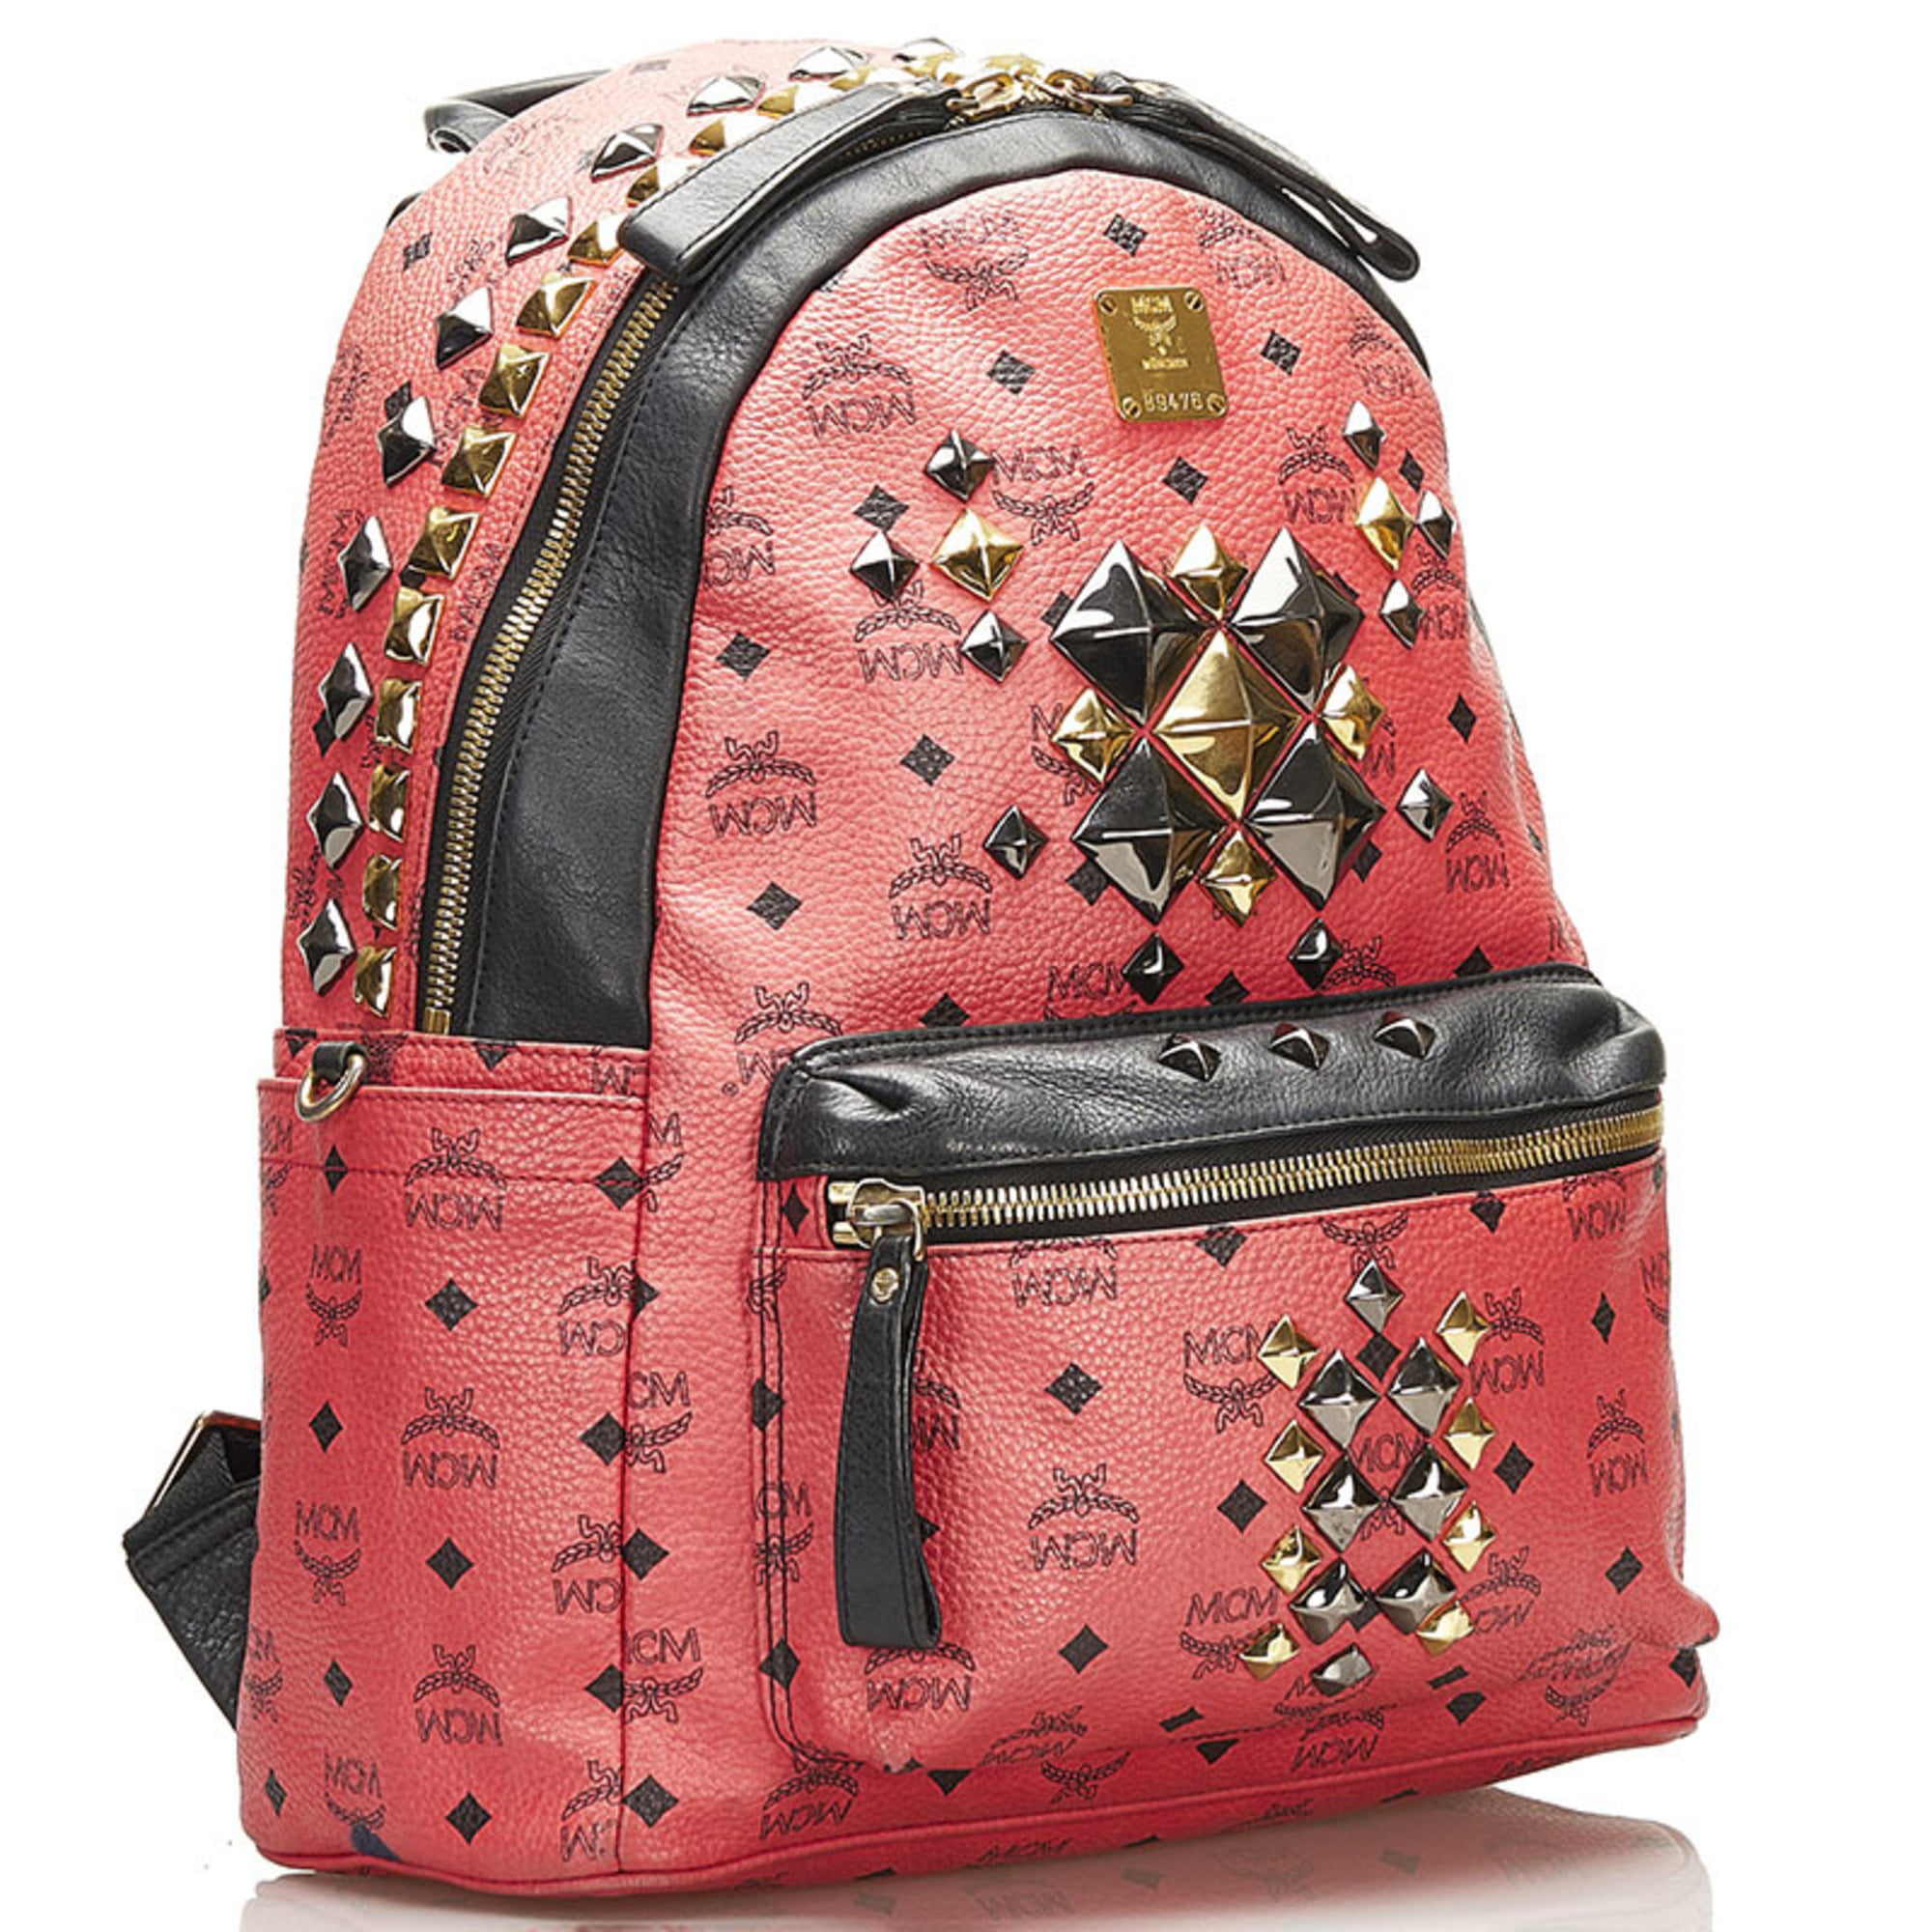 Authenticated Used MCM Visetos MMK8AVE62CO001 Women's Leather Studded  Backpack Black 